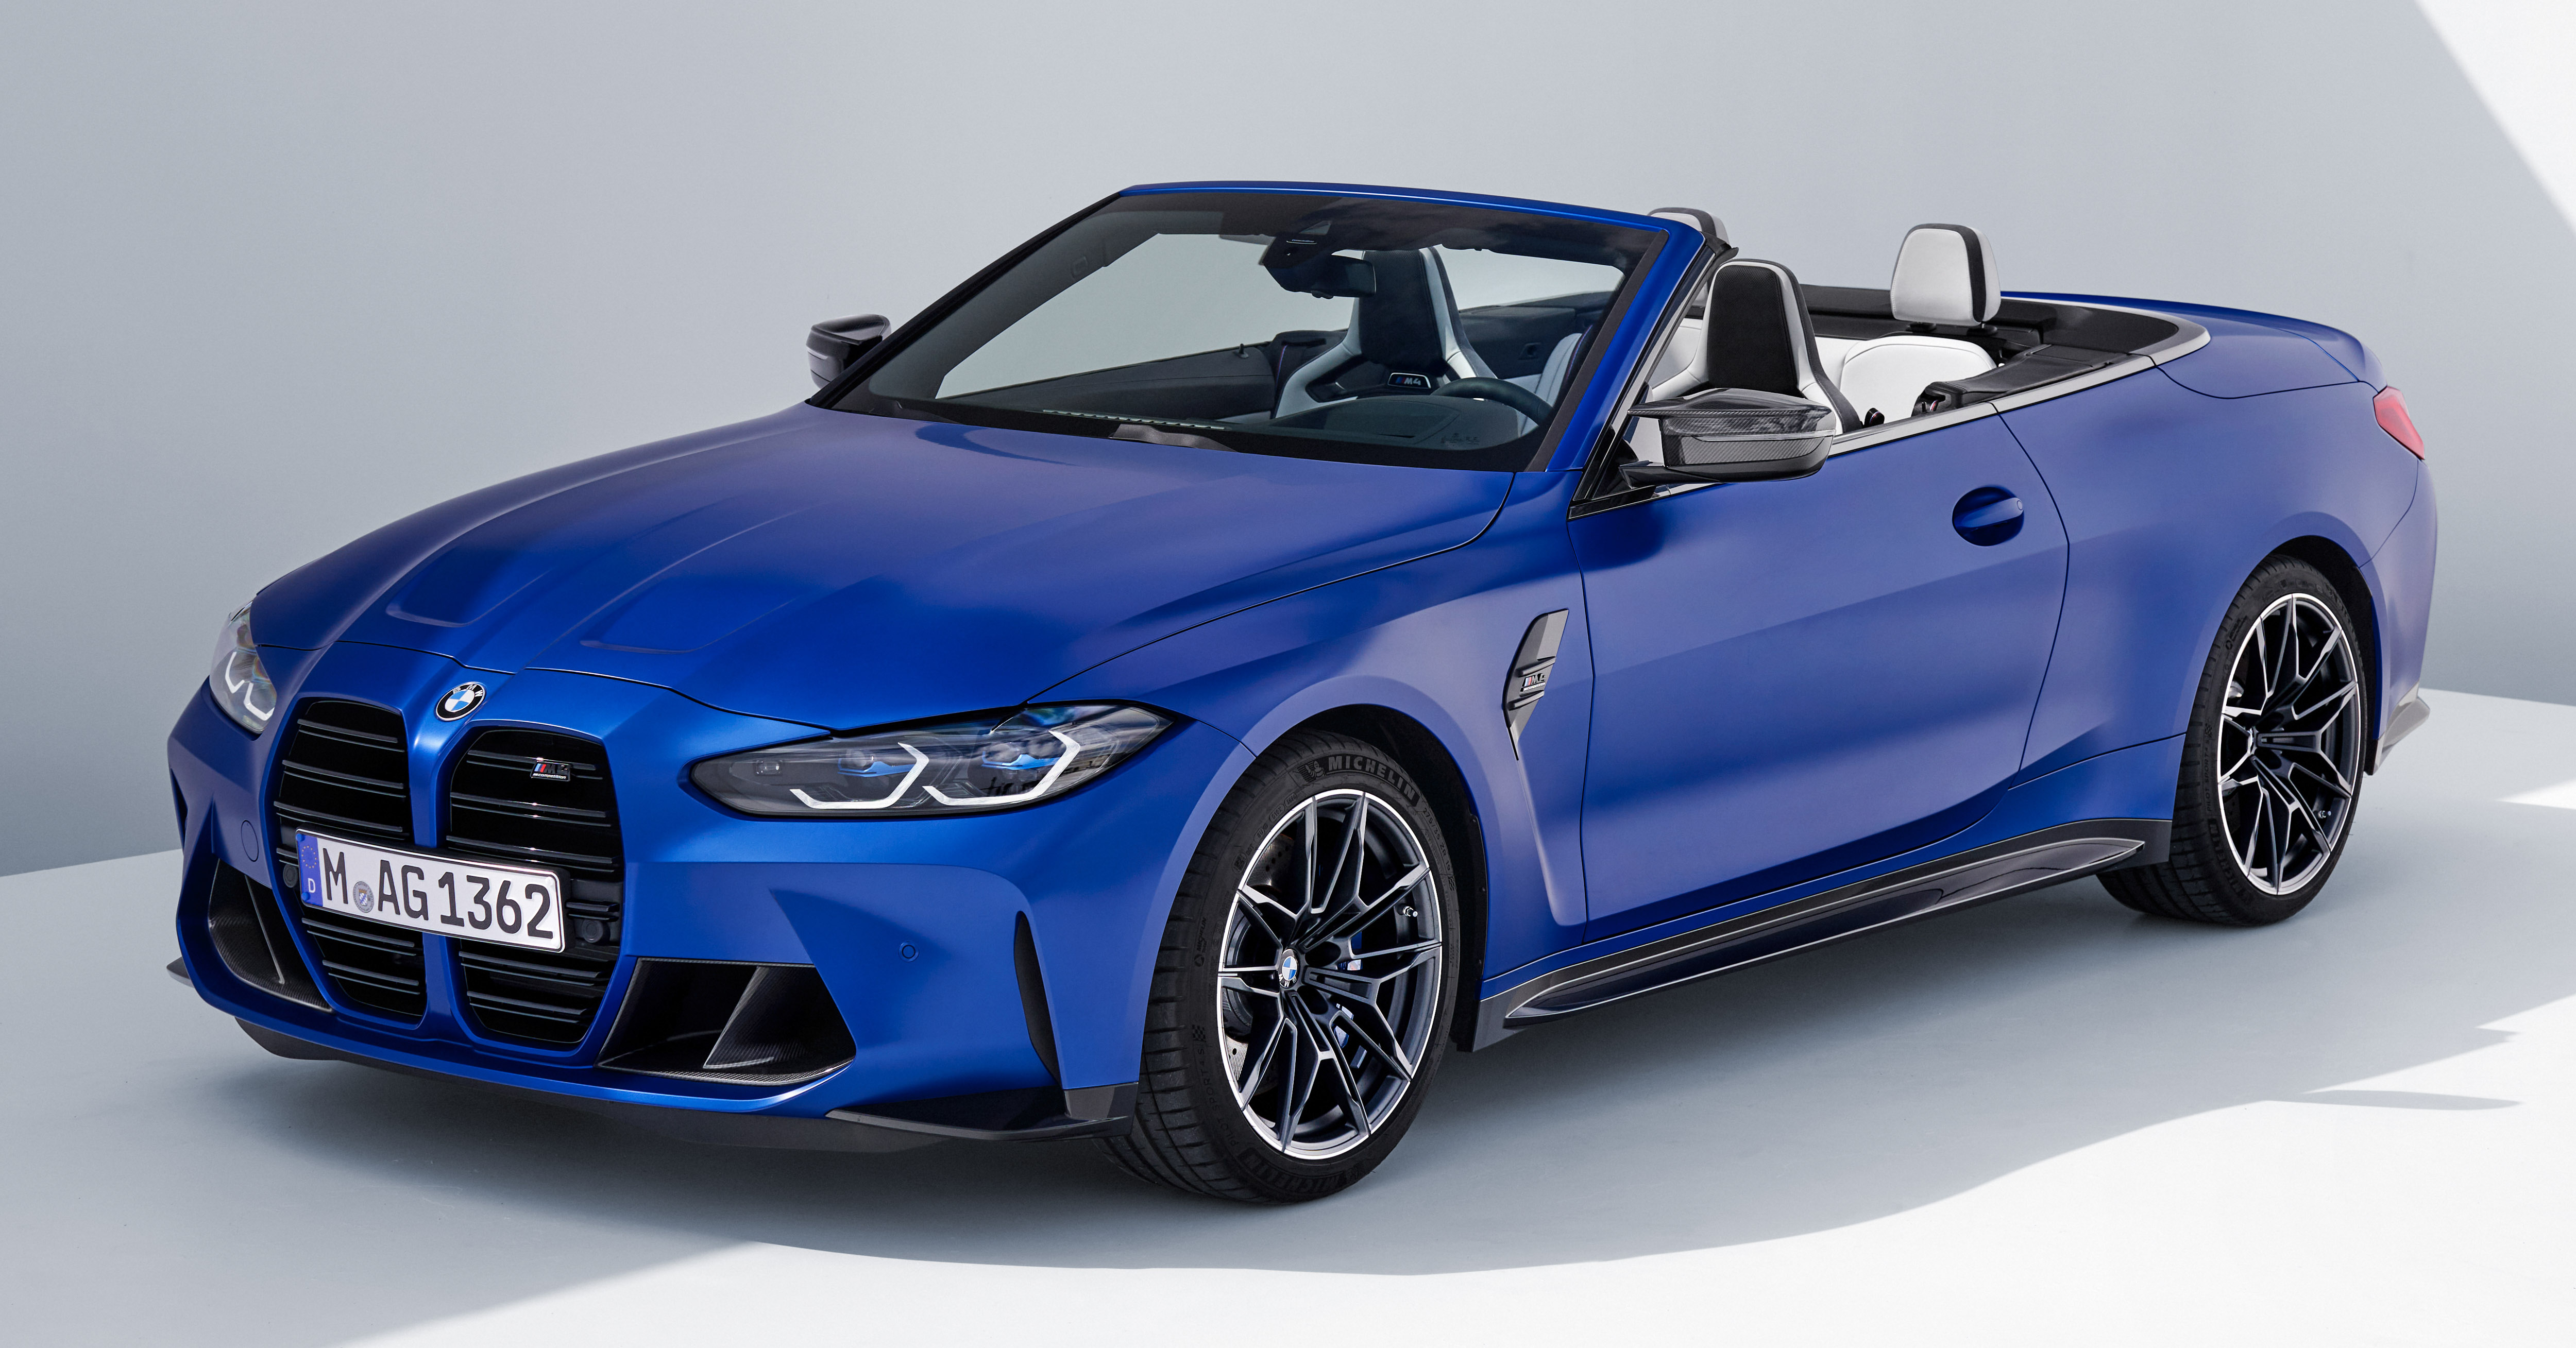 G83 Bmw M4 Competition Convertible With Xdrive Debut 28 Paul Tans